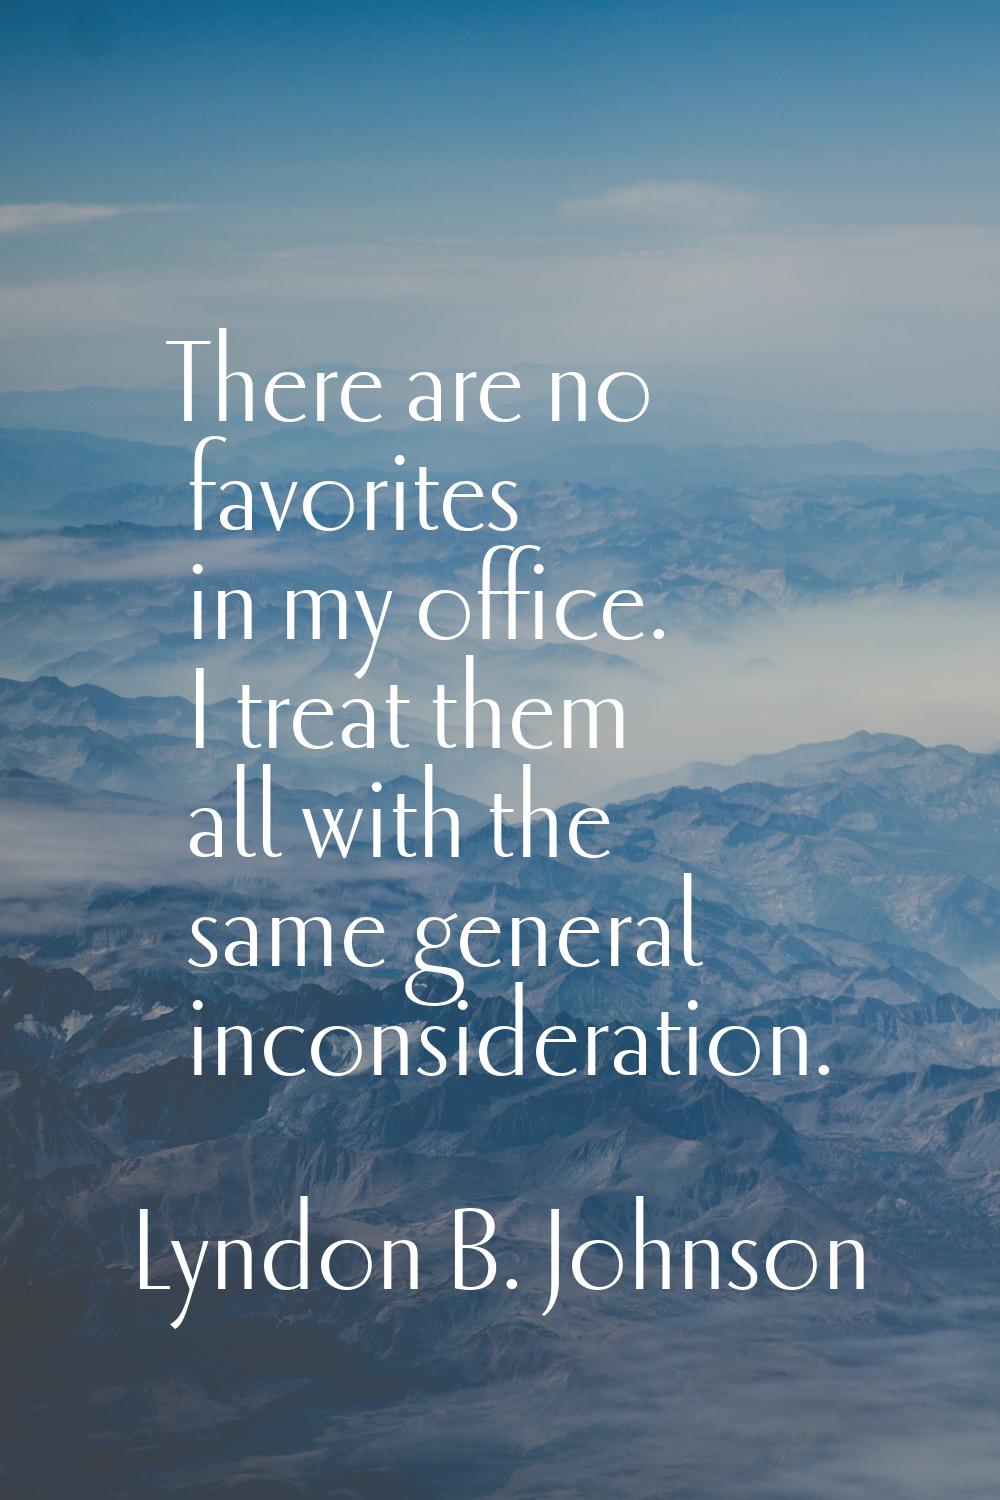 There are no favorites in my office. I treat them all with the same general inconsideration.